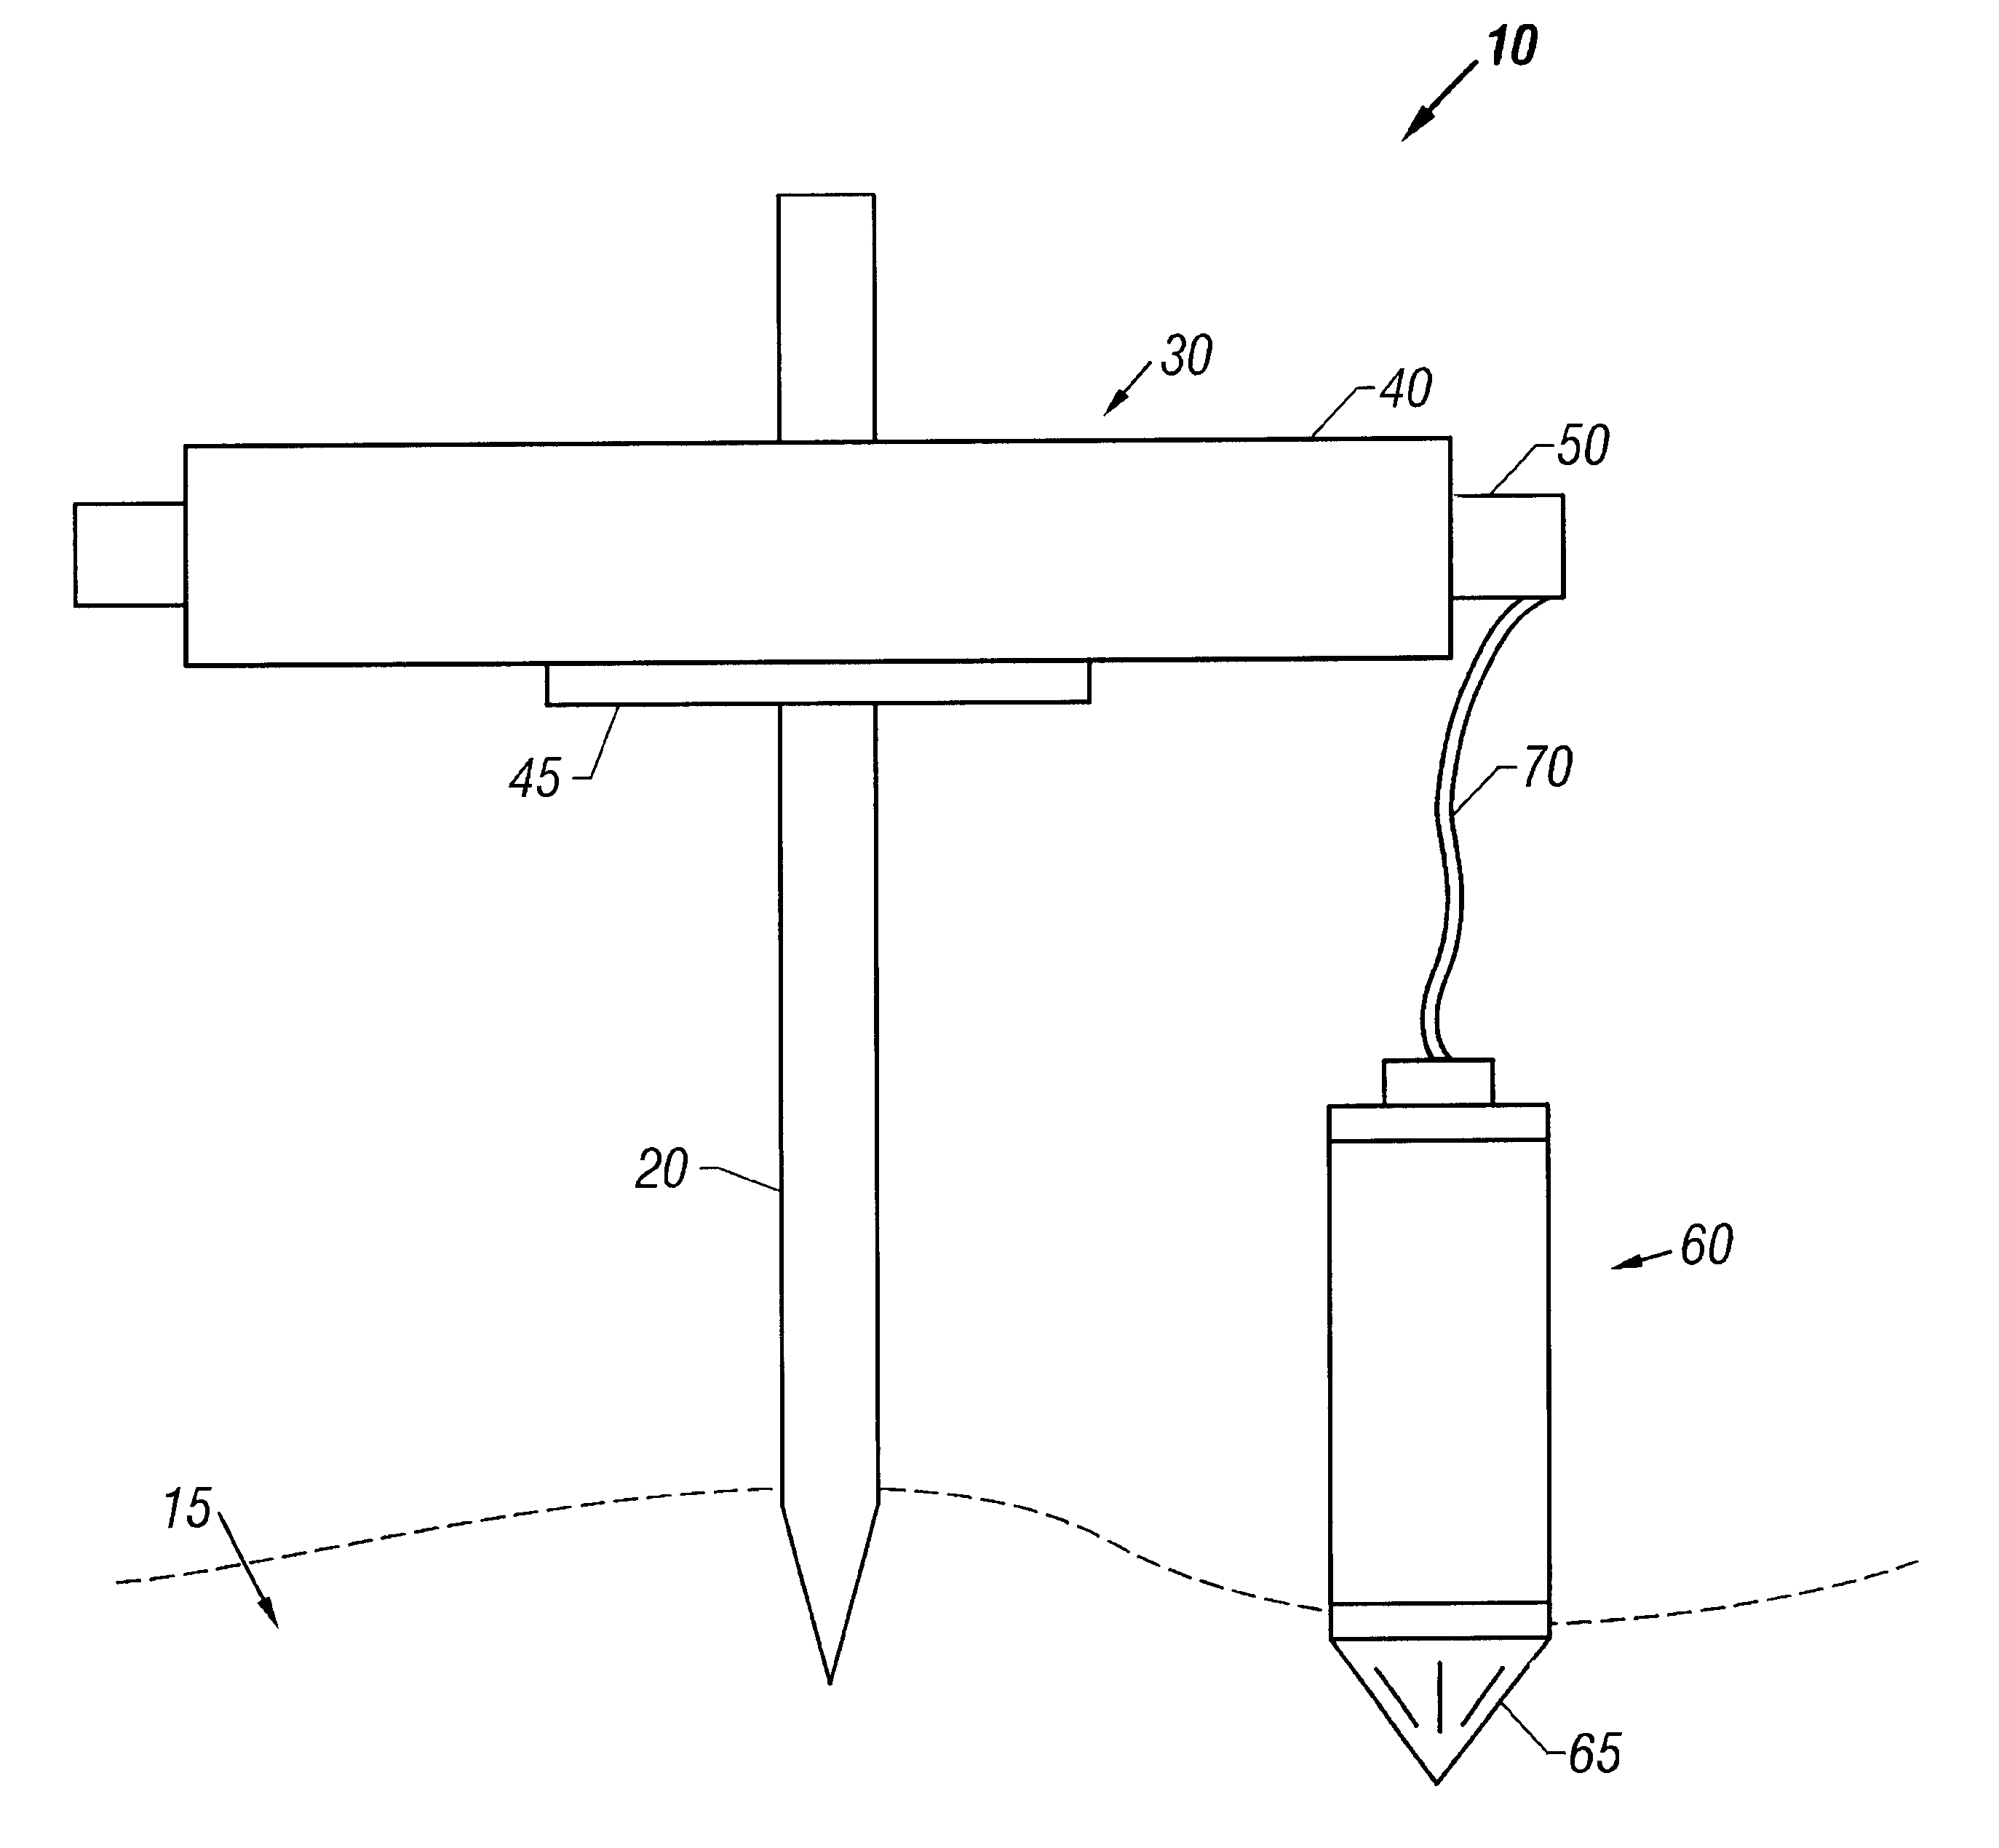 Methods and apparatus for measuring electrical properties of a ground using an electrode configurable as a transmitter or receiver